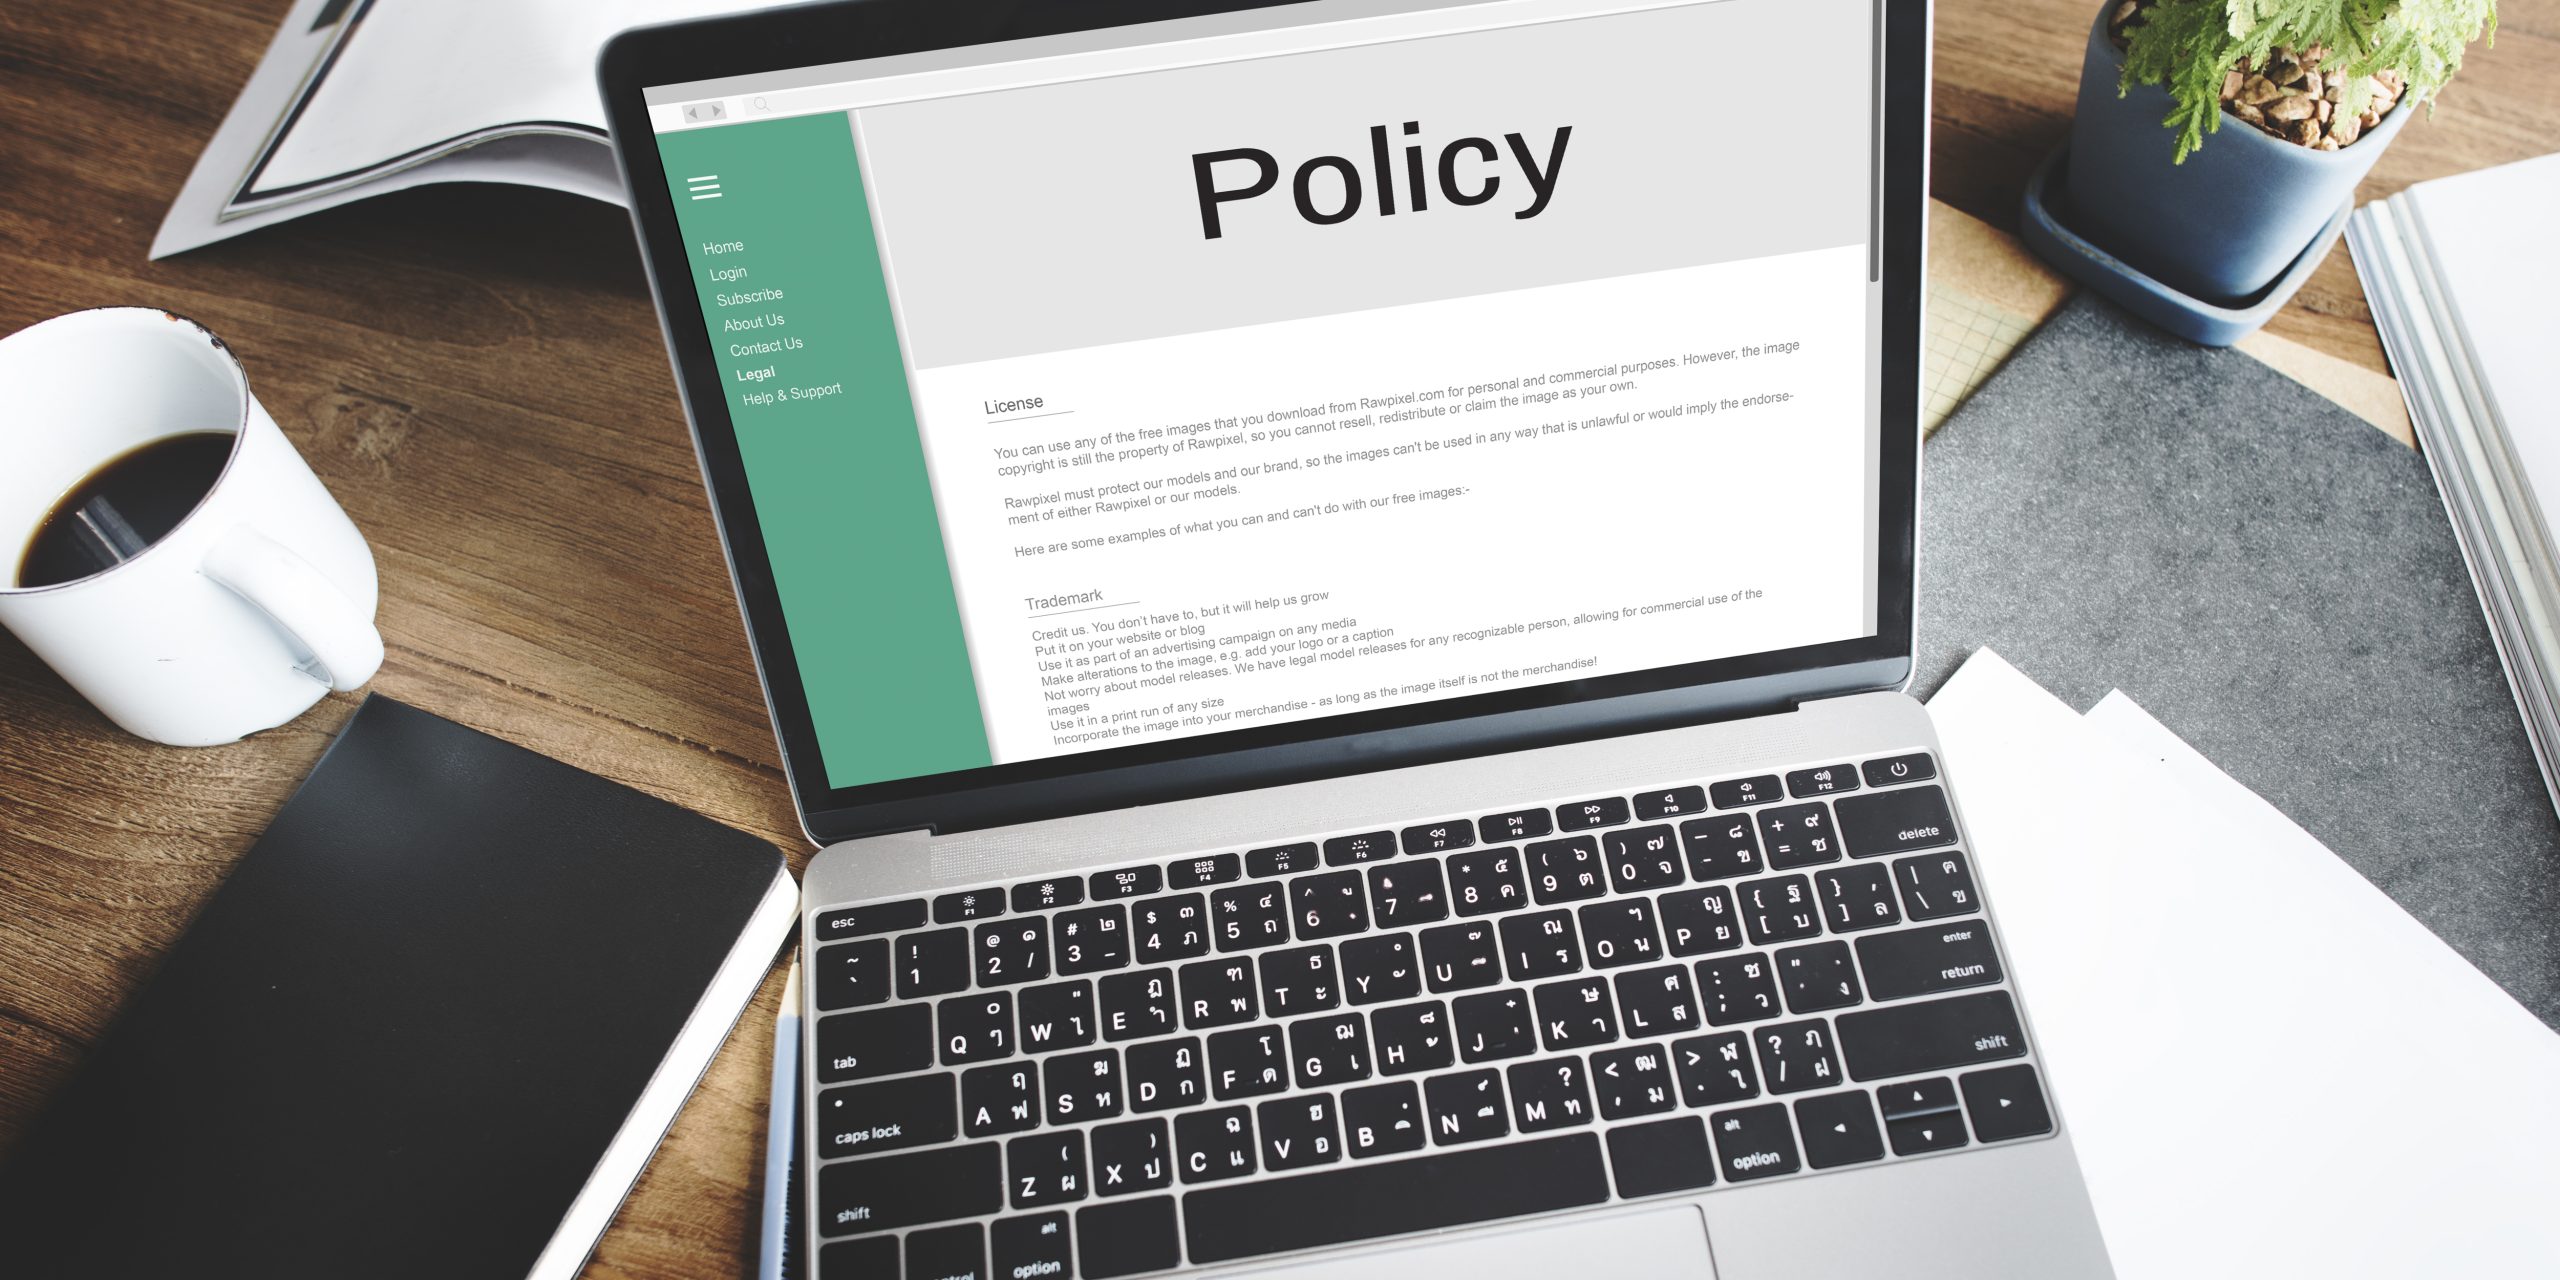 Privacy Policy information showing up on a laptop screen